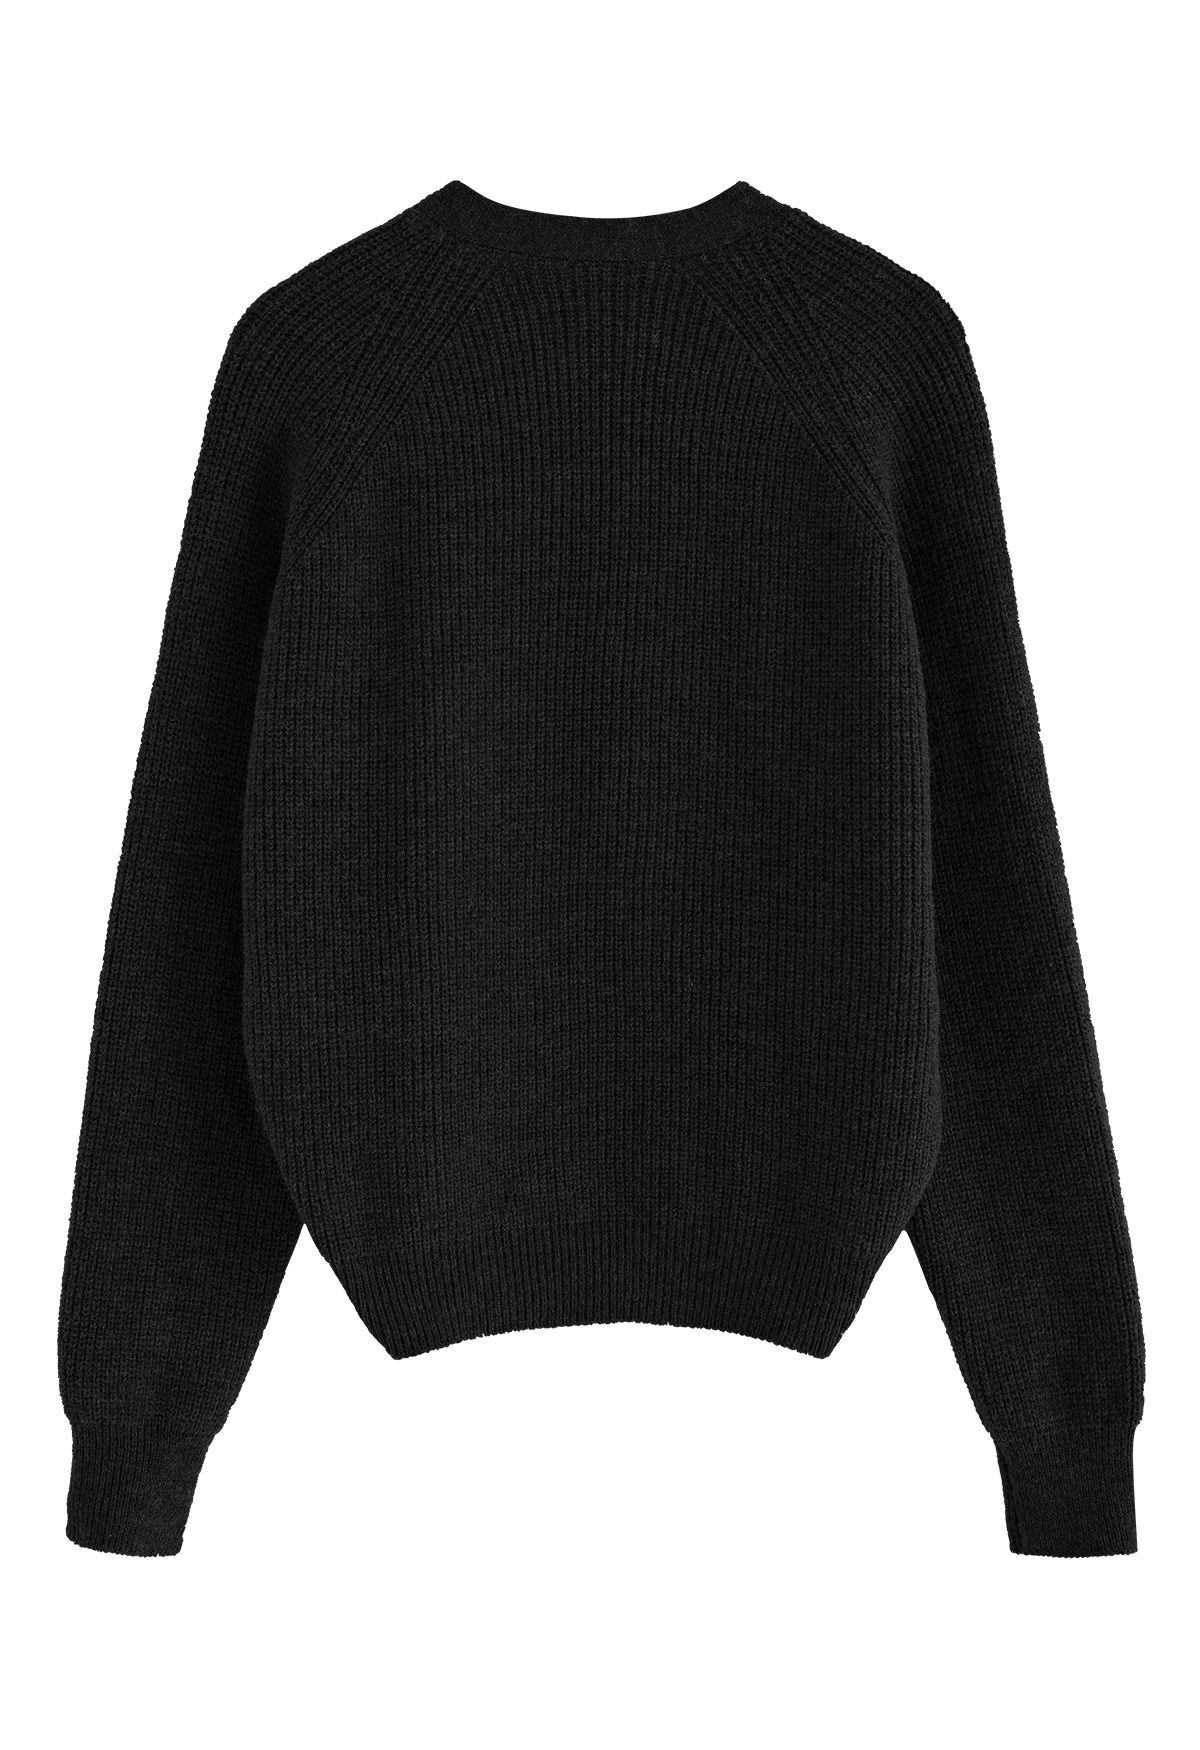 Twist Front Solid Color Sweater in Black - Retro, Indie and Unique Fashion